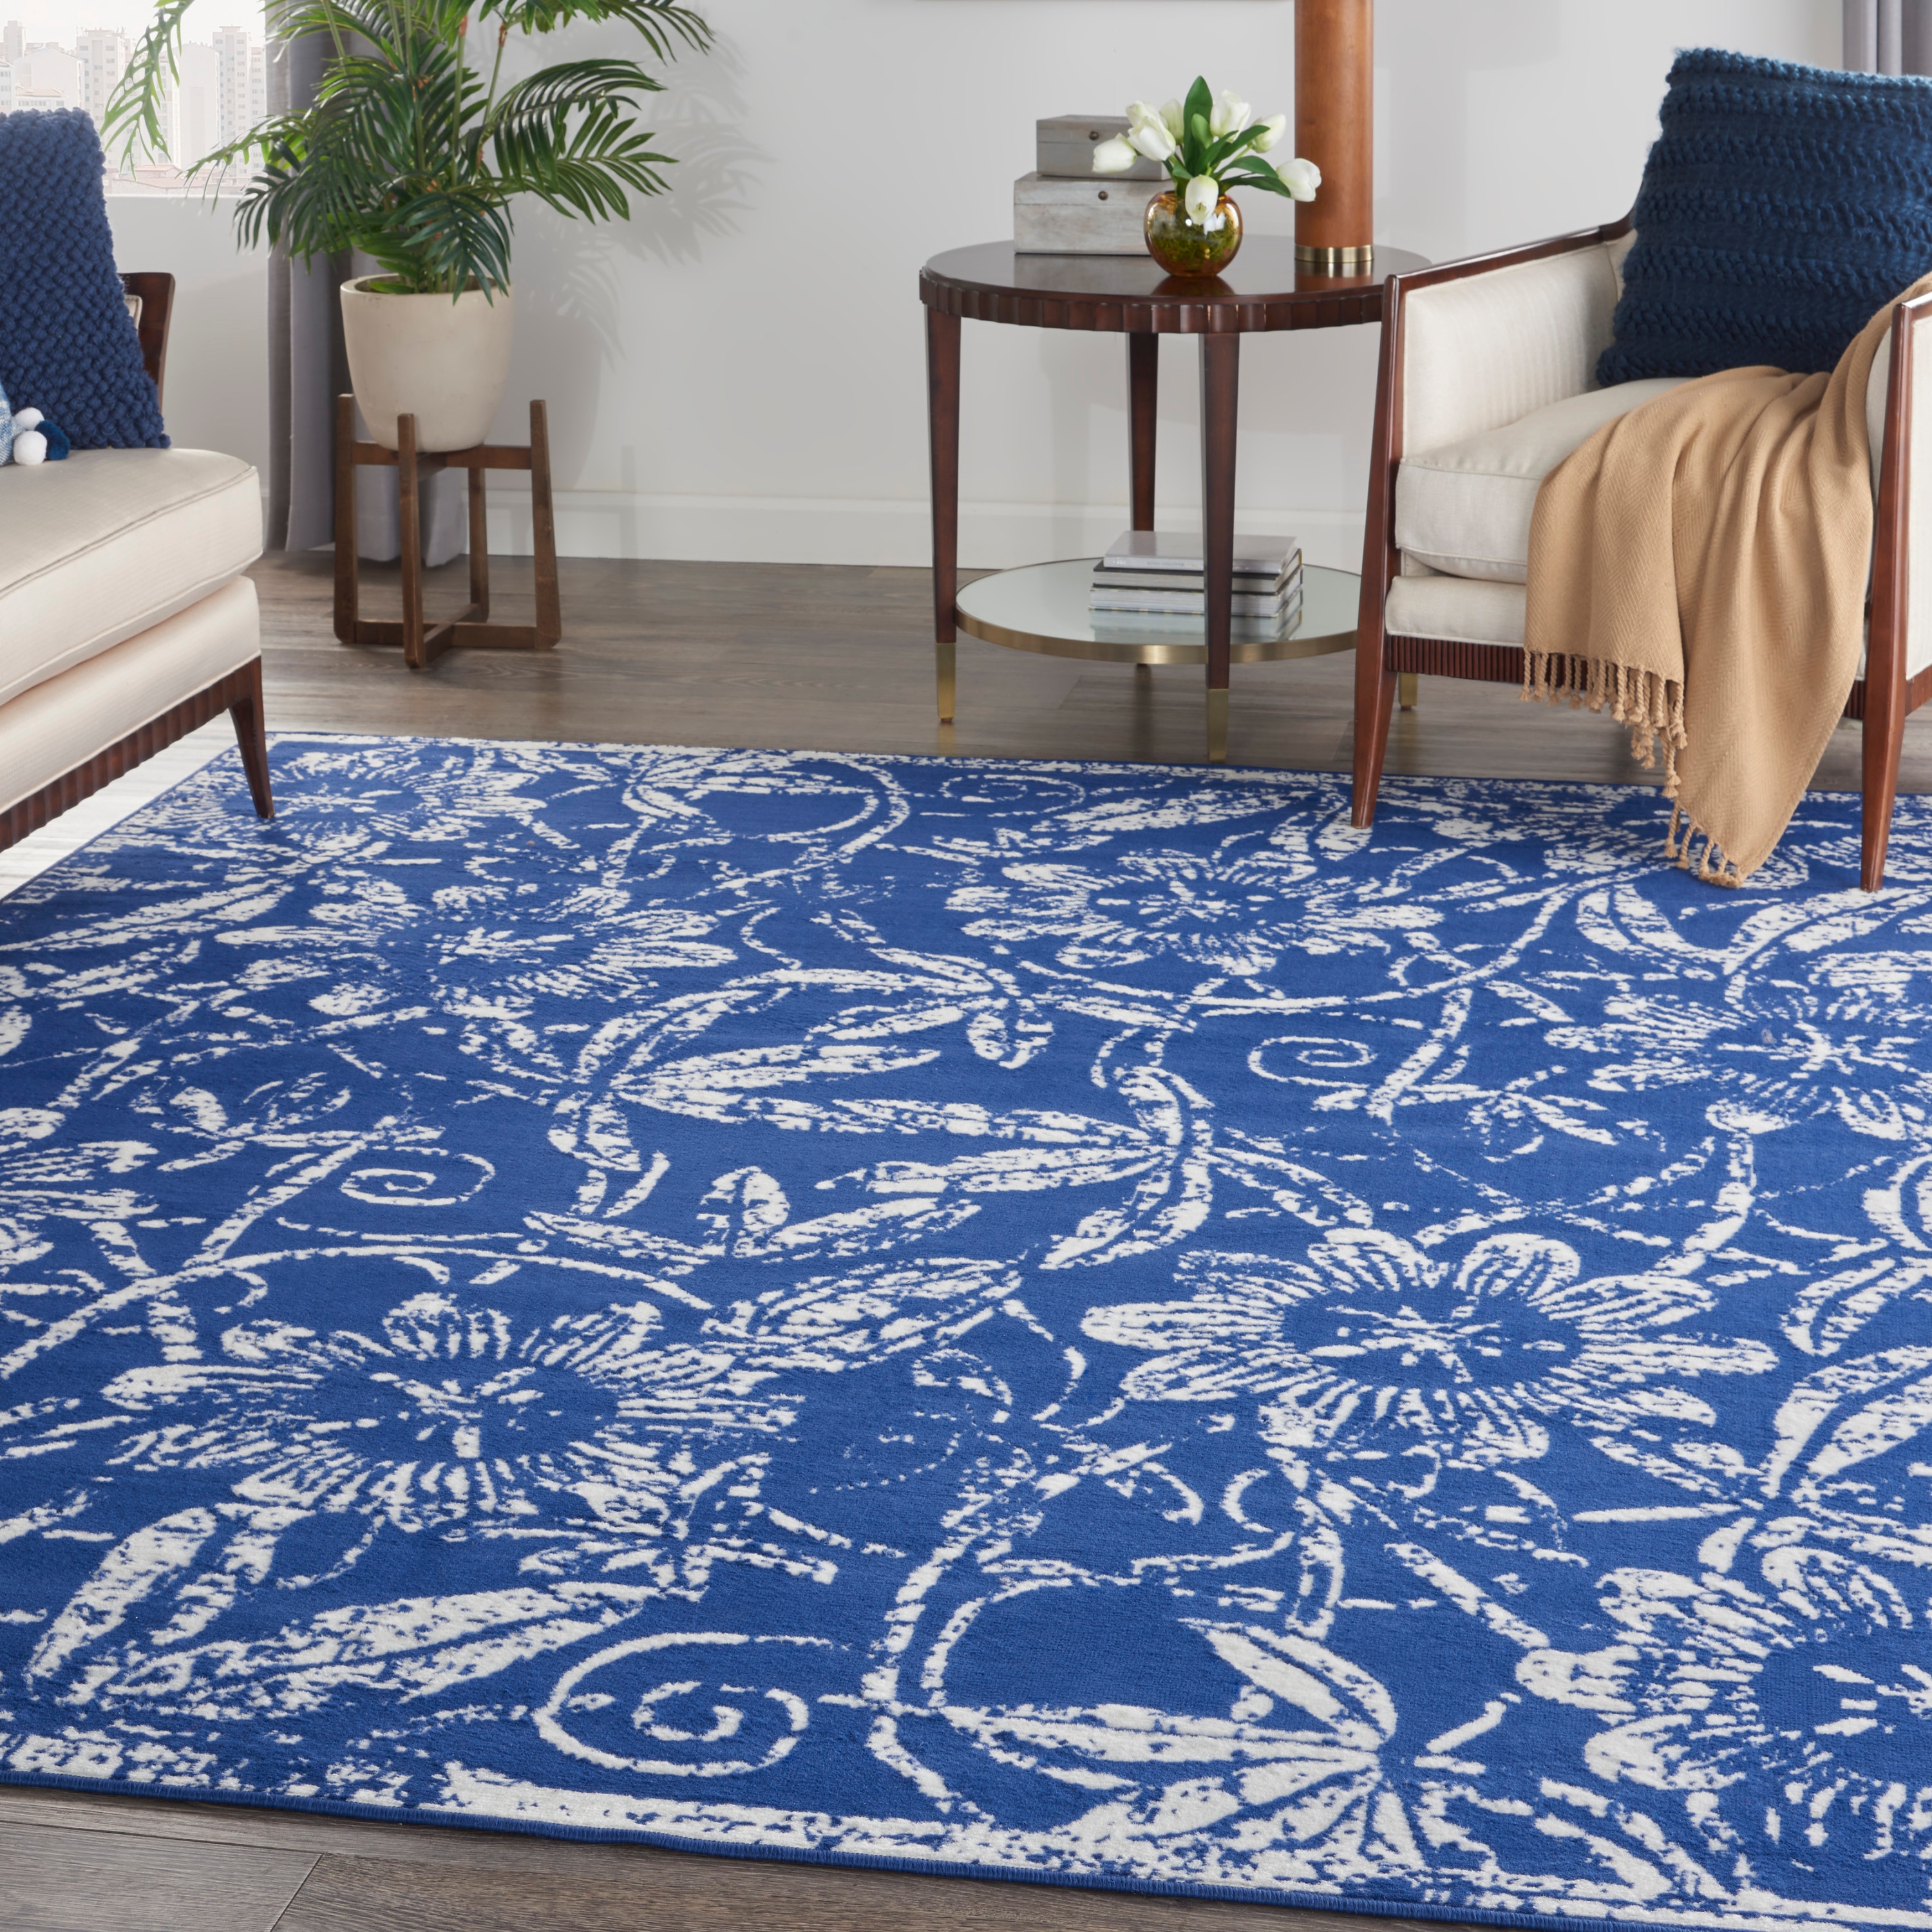 Blue White Soft Cute Area rug Carpet Mat with Baloons Clouds